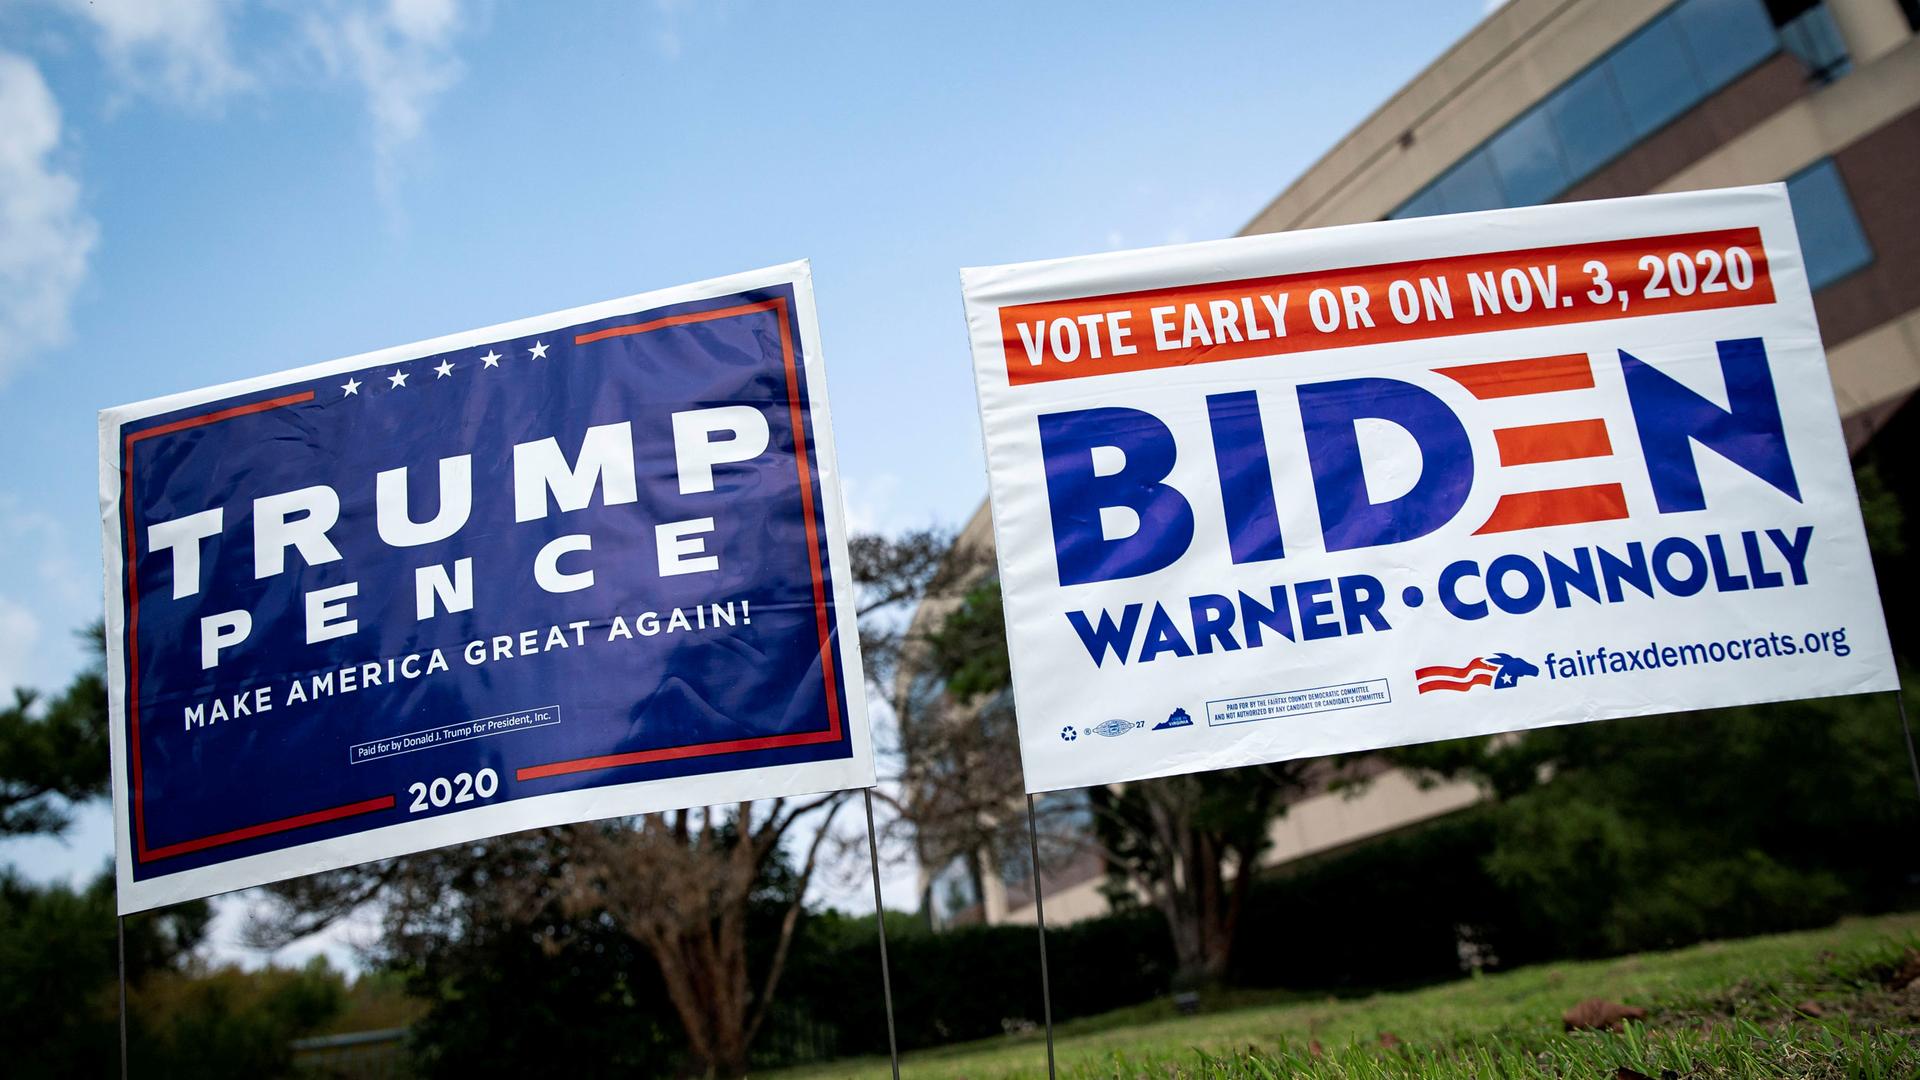 Two political yards signs are shown side-by-side — a mostly blue-colored Trump sign and a white with blue lettering Biden sign.